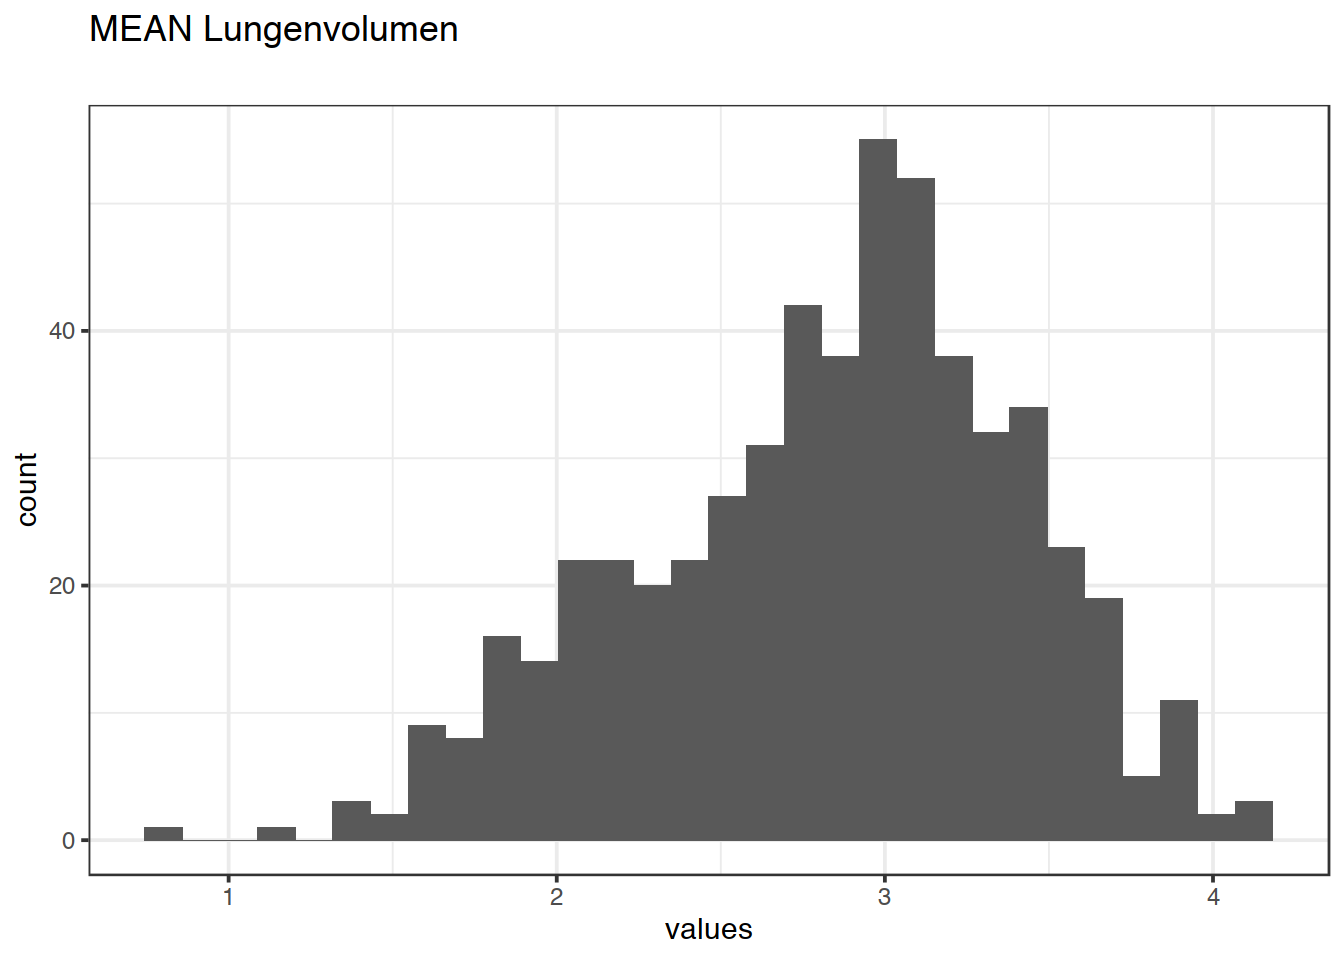 Distribution of values for MEAN Lungenvolumen